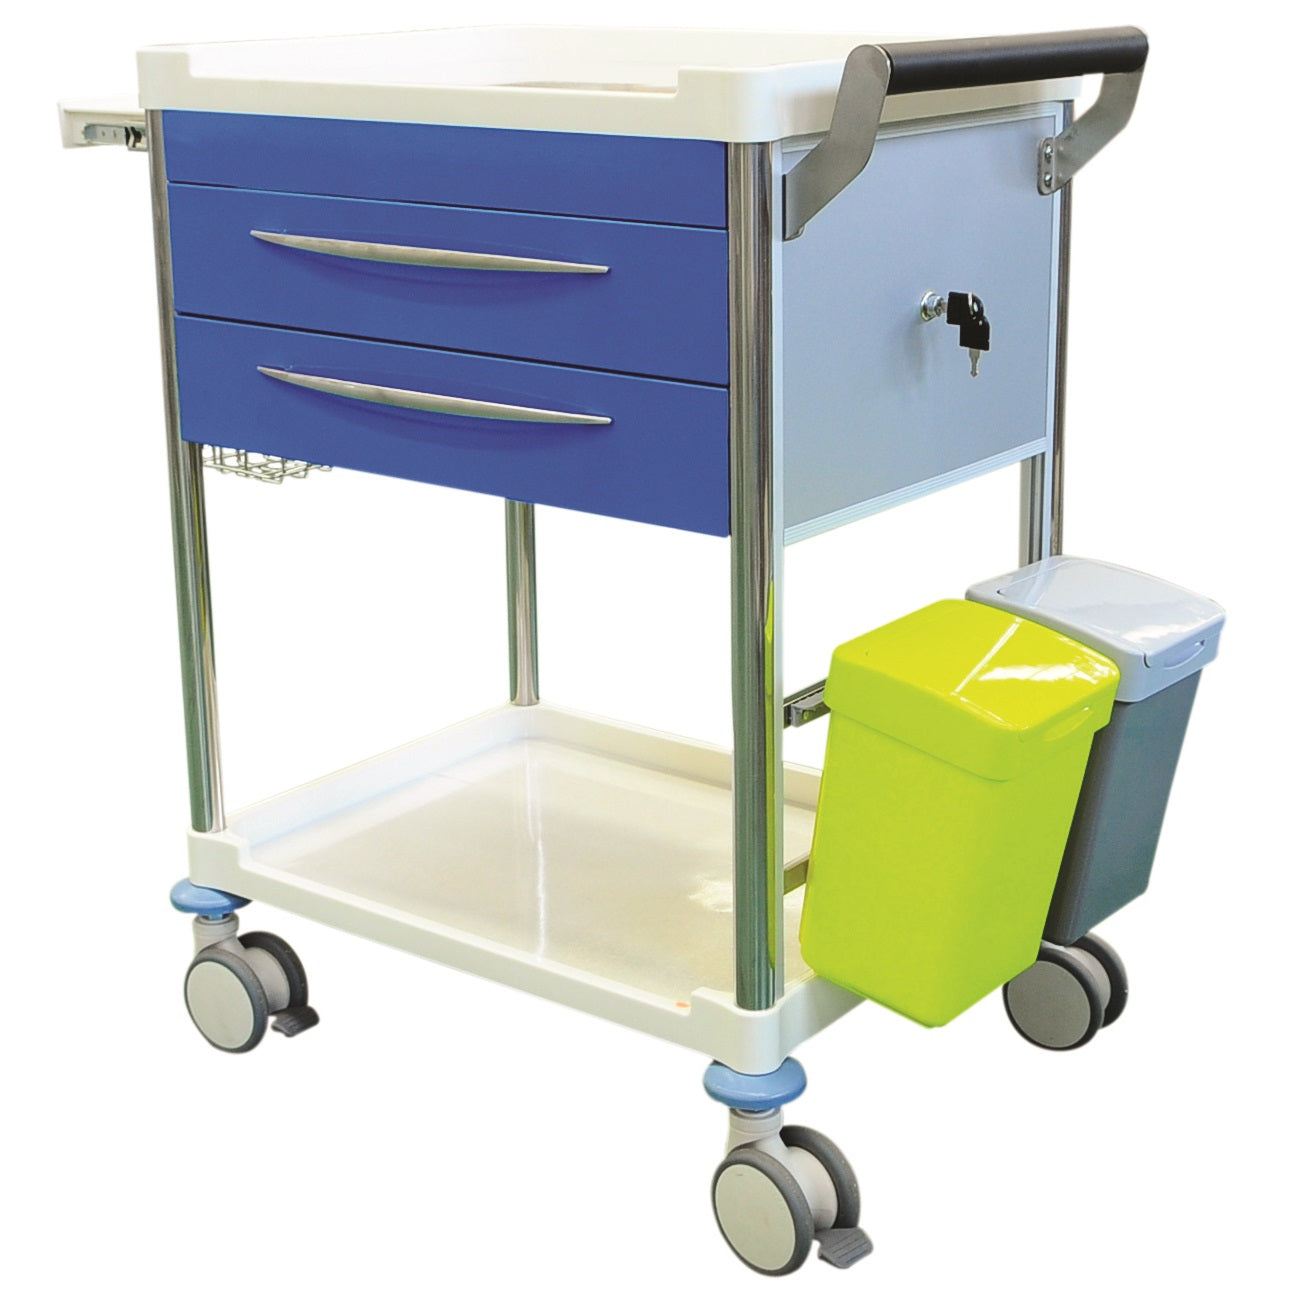 This two drawer treatment trolley comes with all accessories as standard to ensure you have everything you need out of the box.